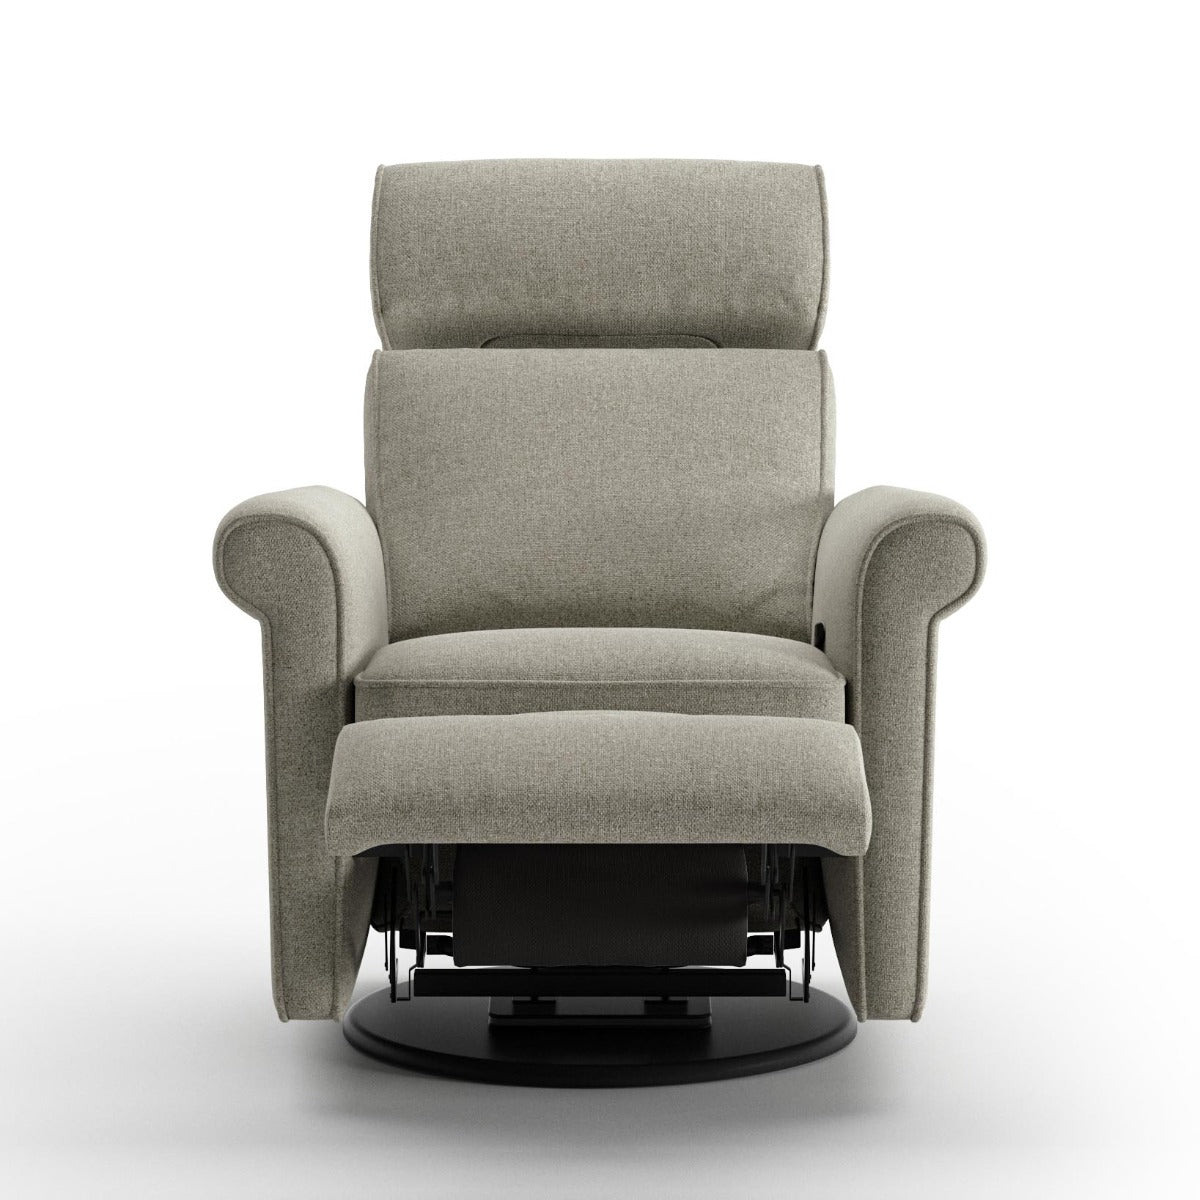 Luonto Furniture Rolled Recliner - Manual - Rene 03